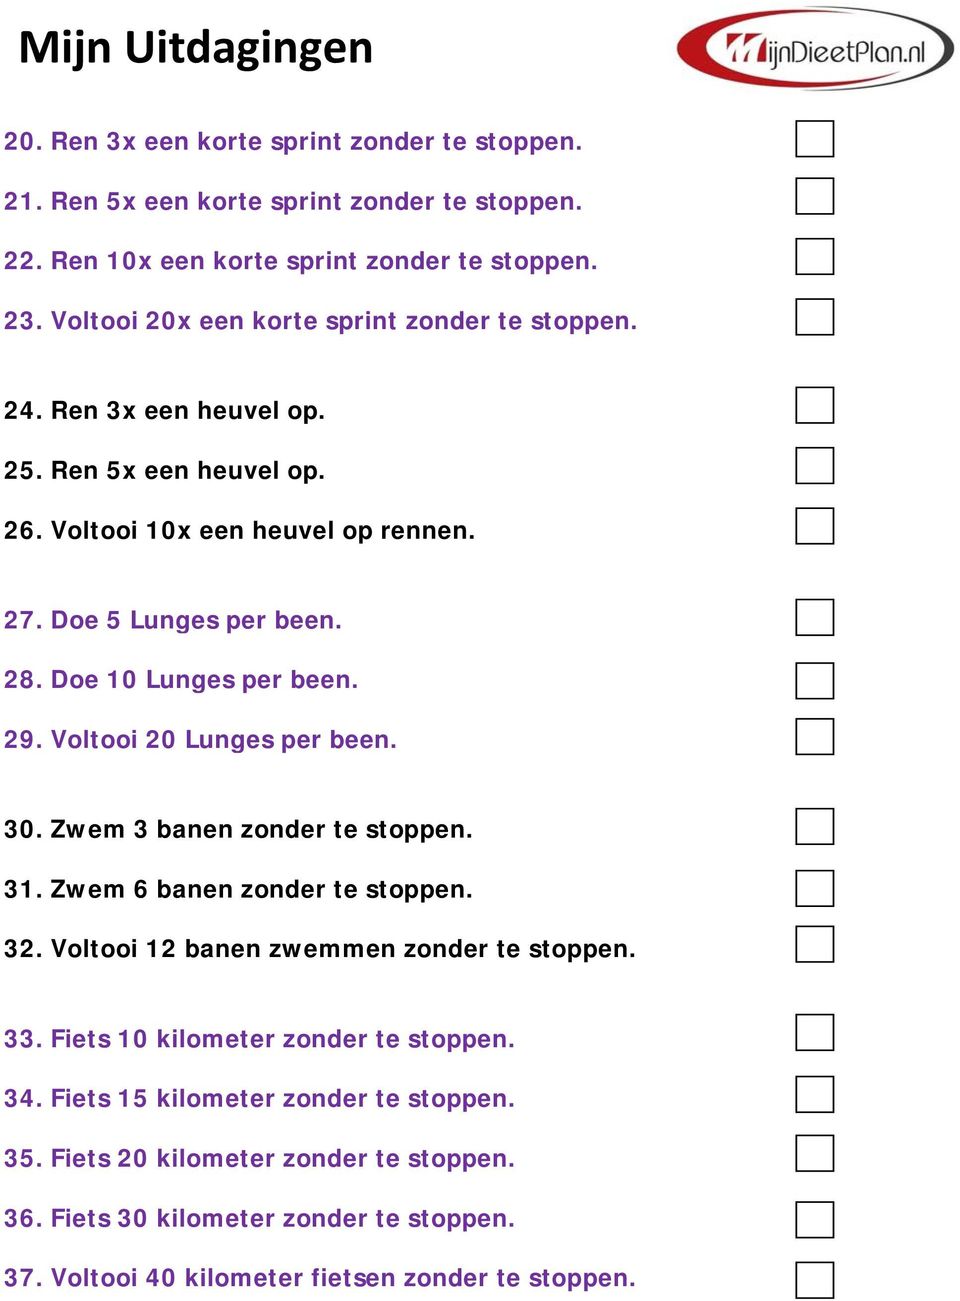 Doe 10 Lunges per been. 29. Voltooi 20 Lunges per been. 30. Zwem 3 banen zonder te stoppen. 31. Zwem 6 banen zonder te stoppen. 32. Voltooi 12 banen zwemmen zonder te stoppen.